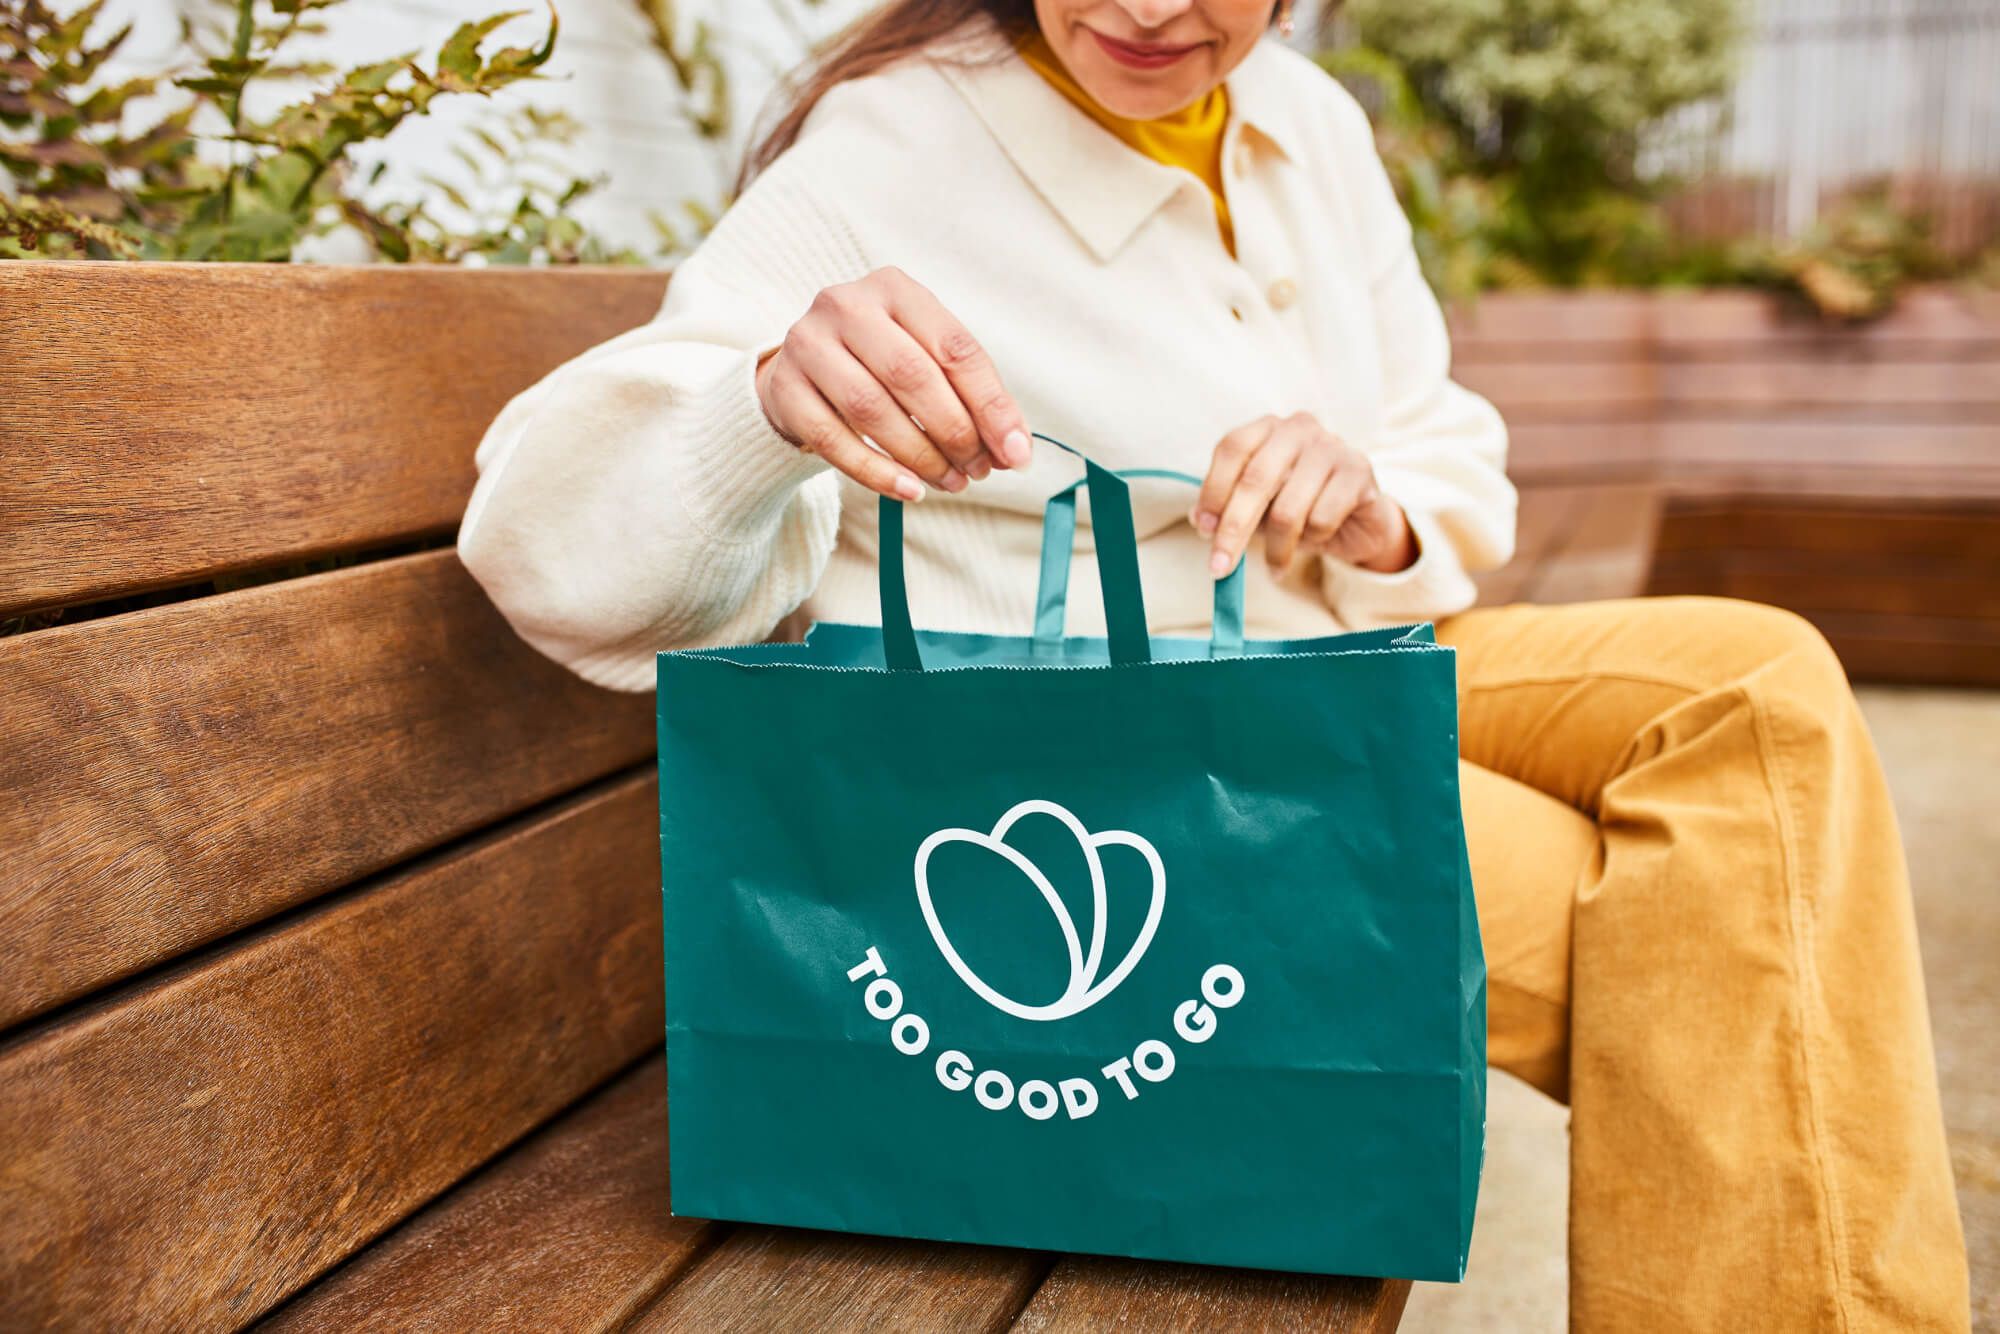 Impressive Progress In The Fight Against Food Waste: Too Good To Go Reports +50% Meals Saved in 2022